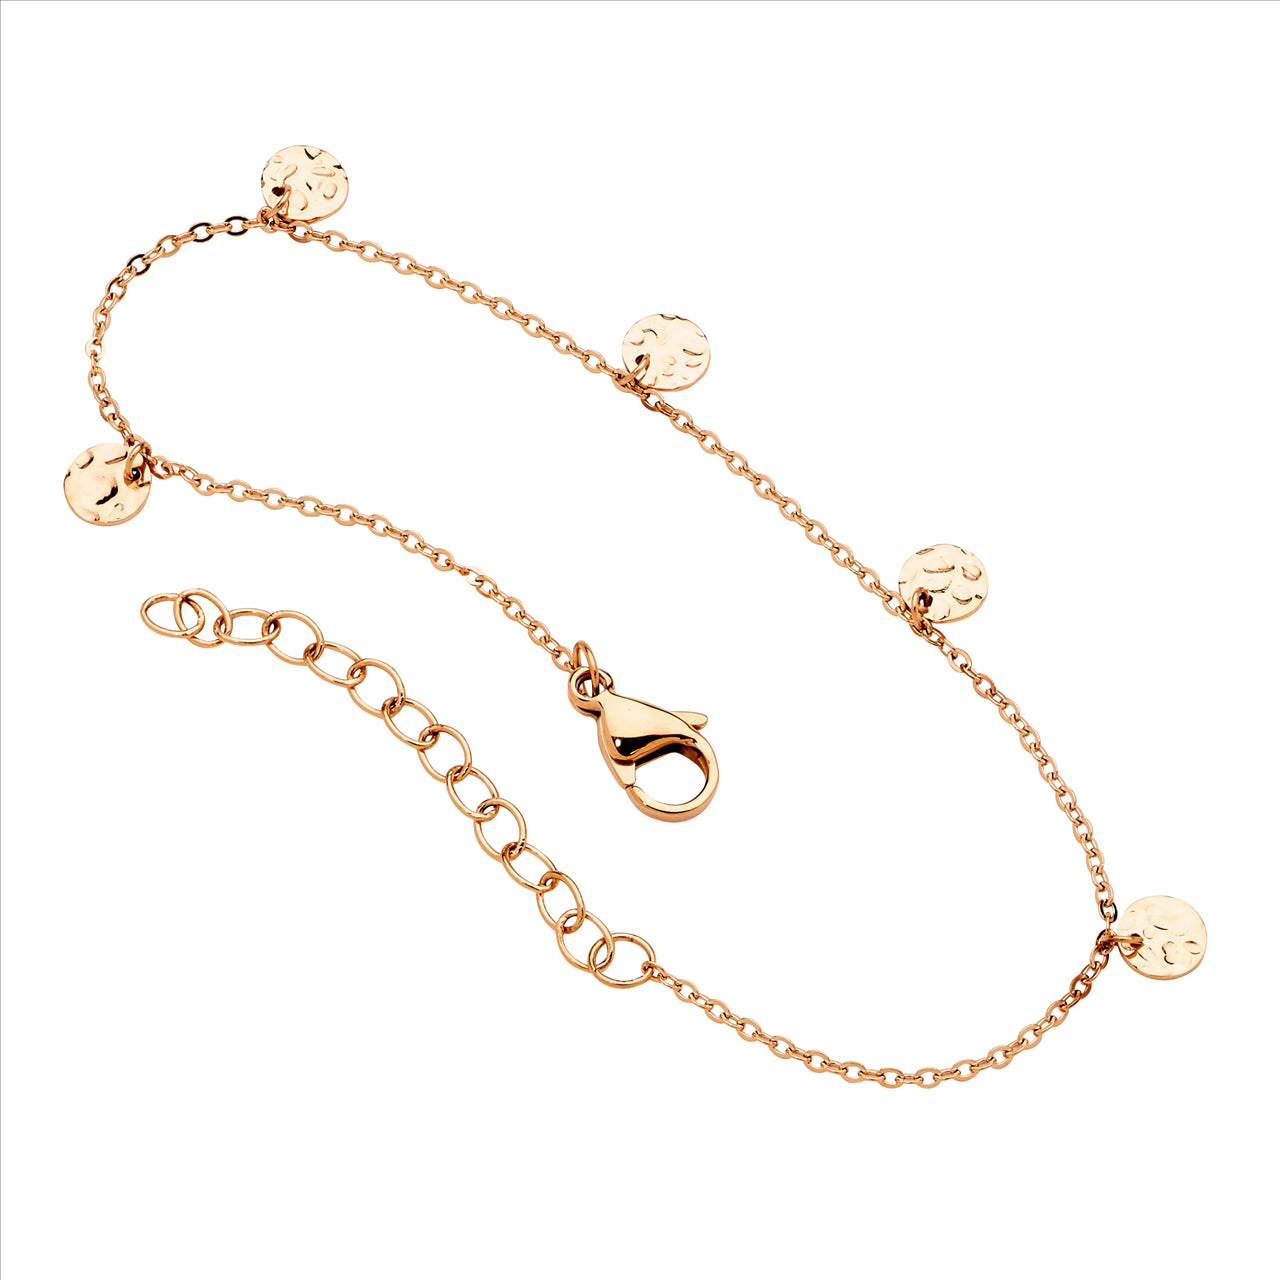 Stainless Steel, Rose Gold Plated Disk Feature Bracelet